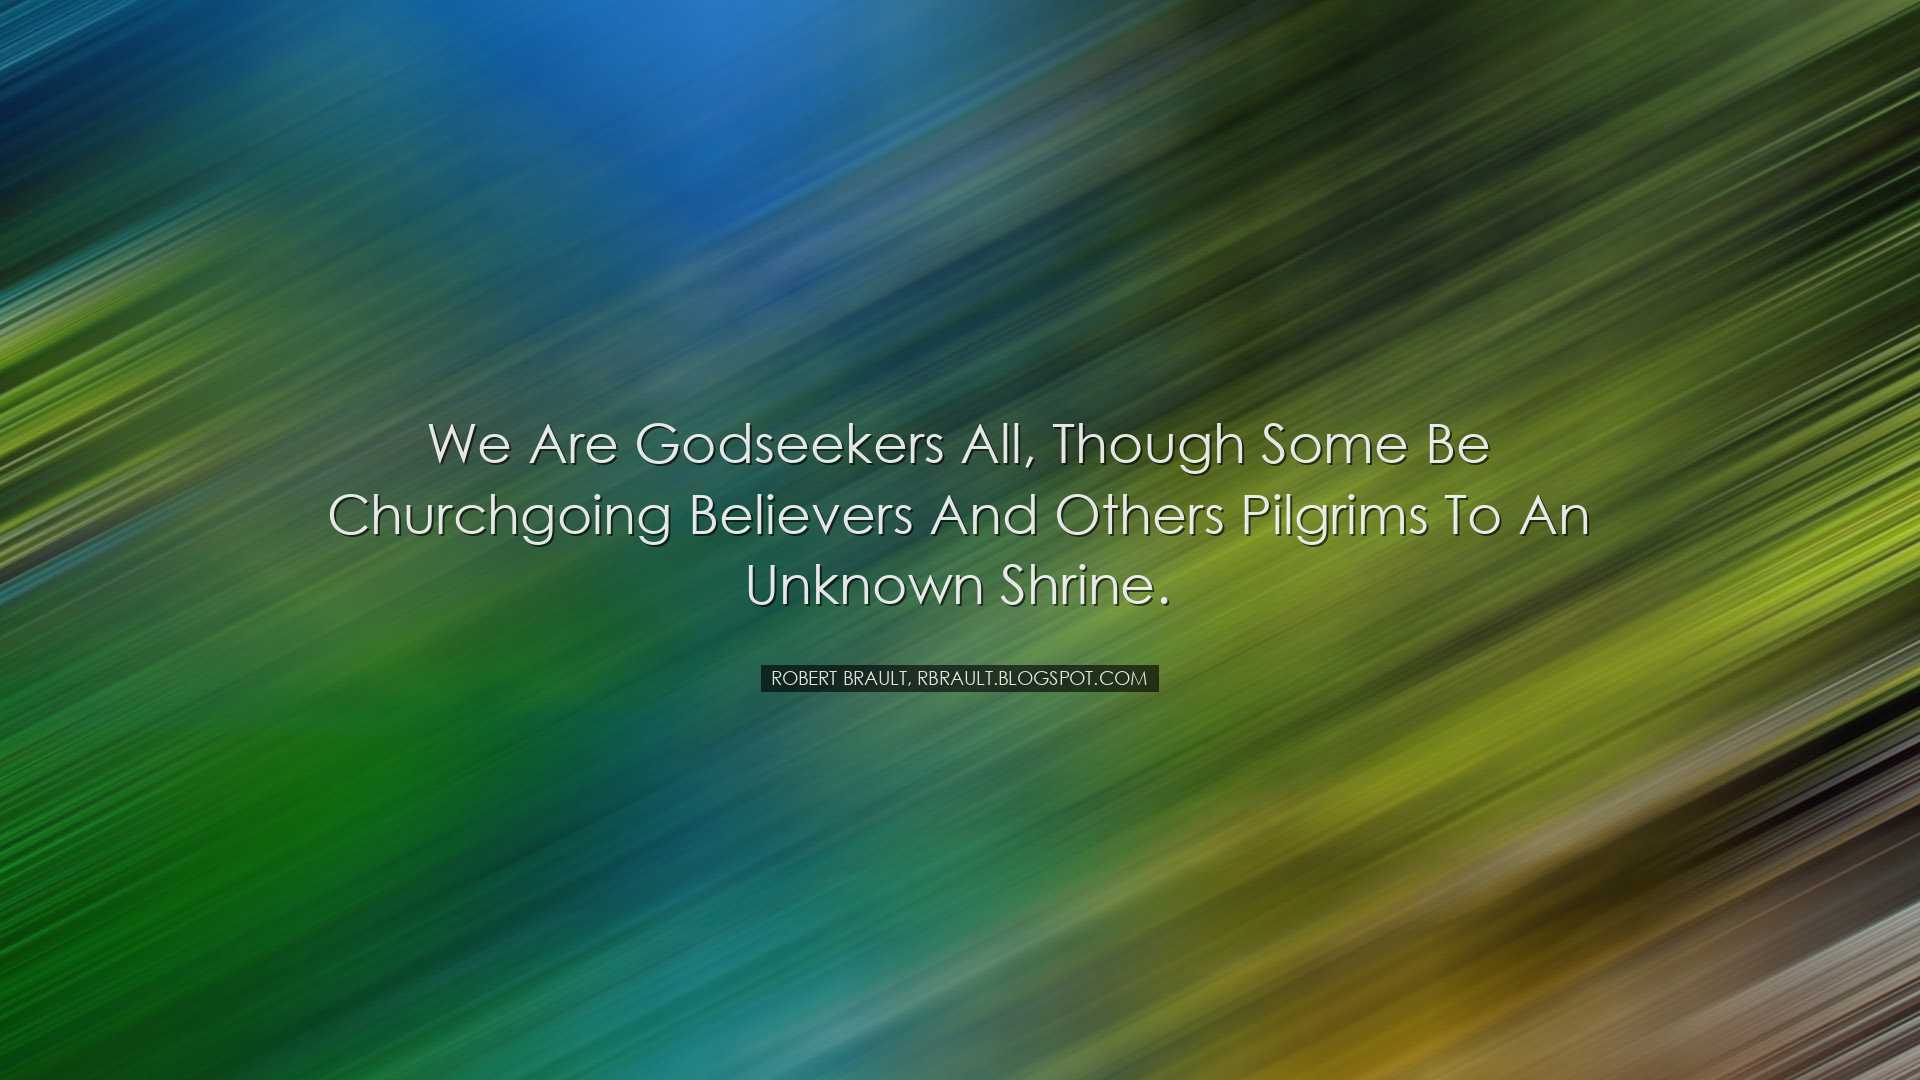 We are Godseekers all, though some be churchgoing believers and ot